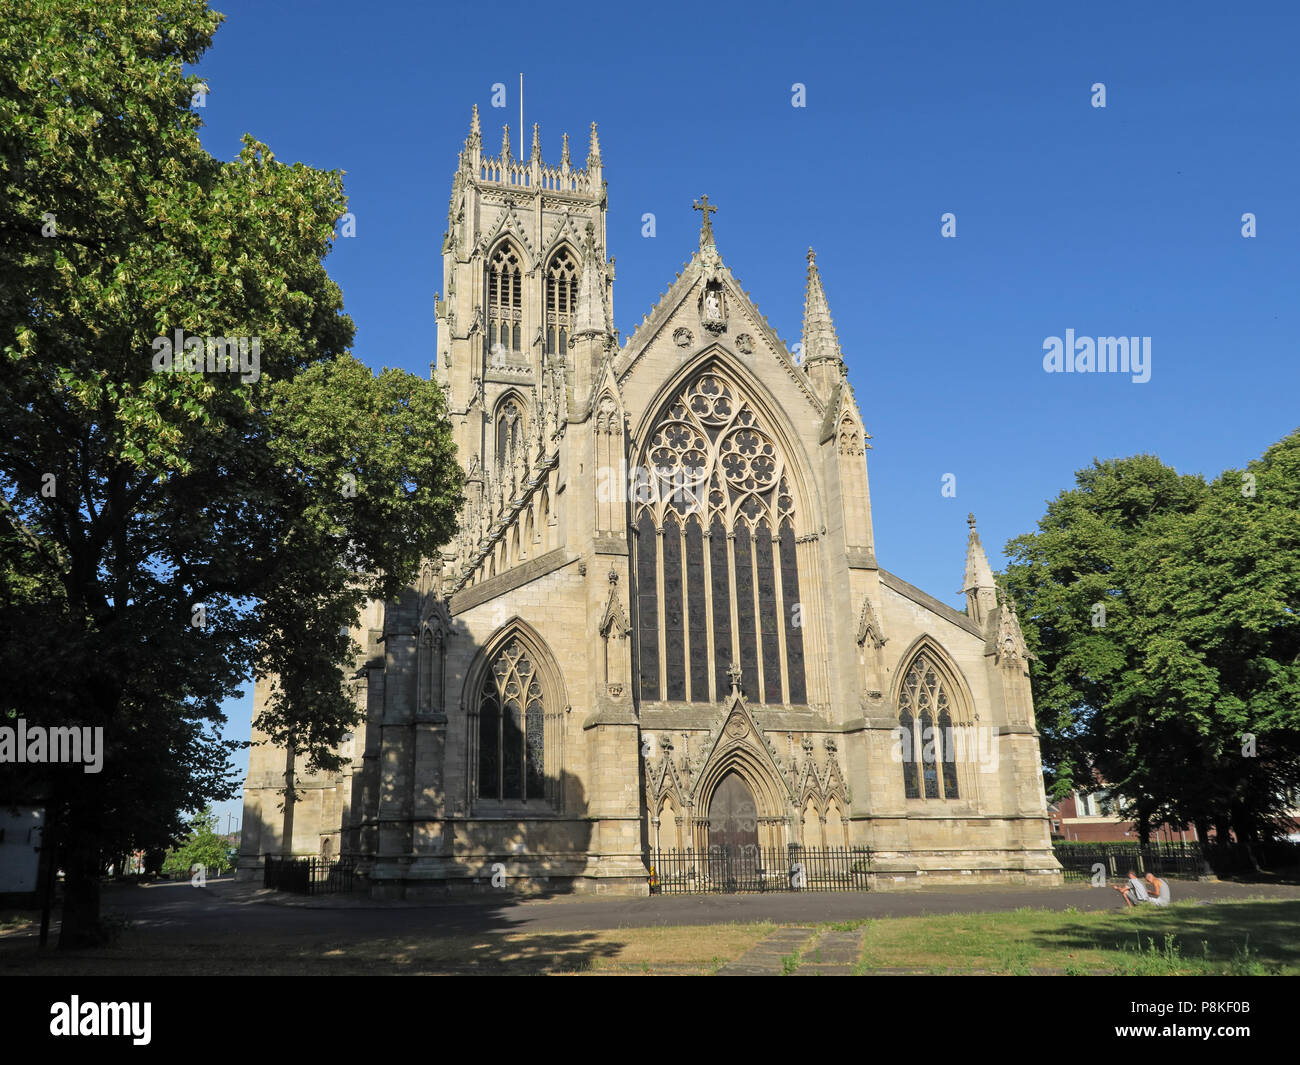 Doncaster Minster Church - St Georges, 9 Church St, Doncaster, South Yorkshire, England, UK,  DN1 1RD Stock Photo